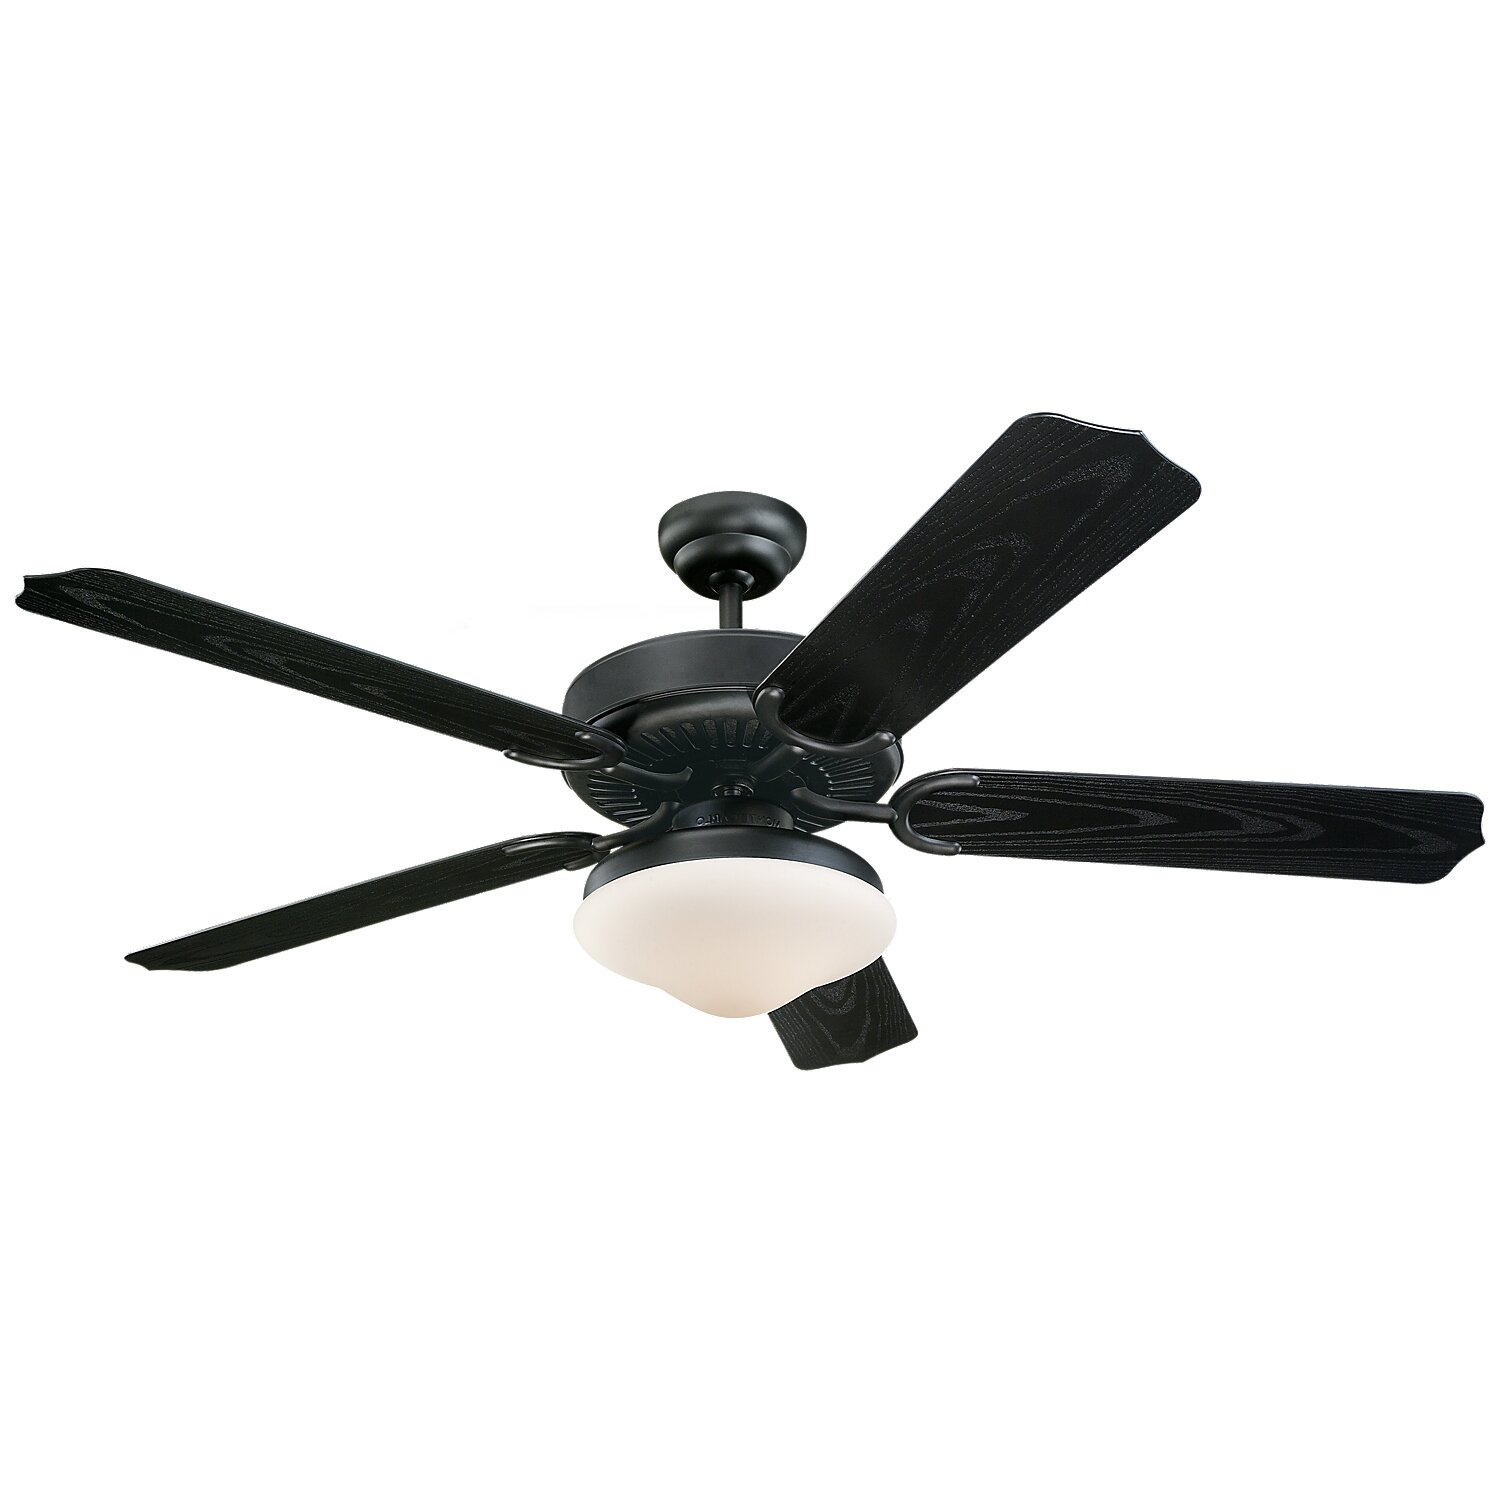 Darby Home Co 52 Dayton 5 Blade Indoor Outdoor Ceiling Fan